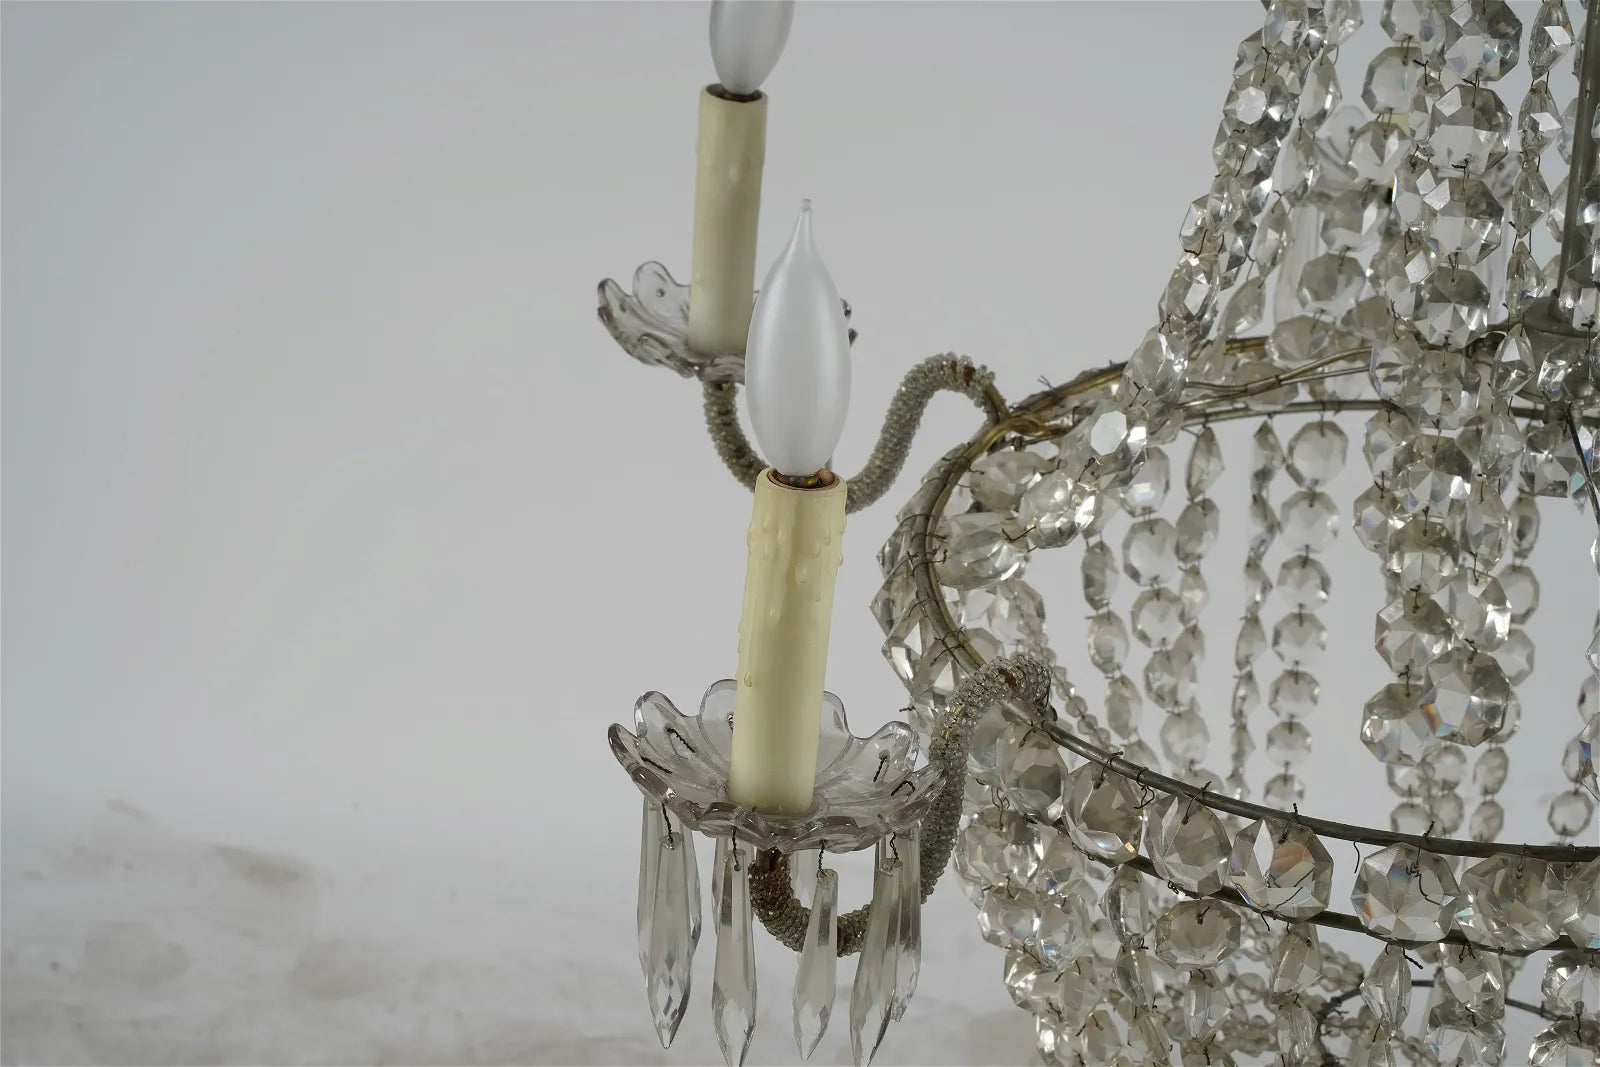 AL1-063: MID 19TH CENTURY FRENCH EMPIRE SIX LIGHT CRYSTAL CHANDELIER